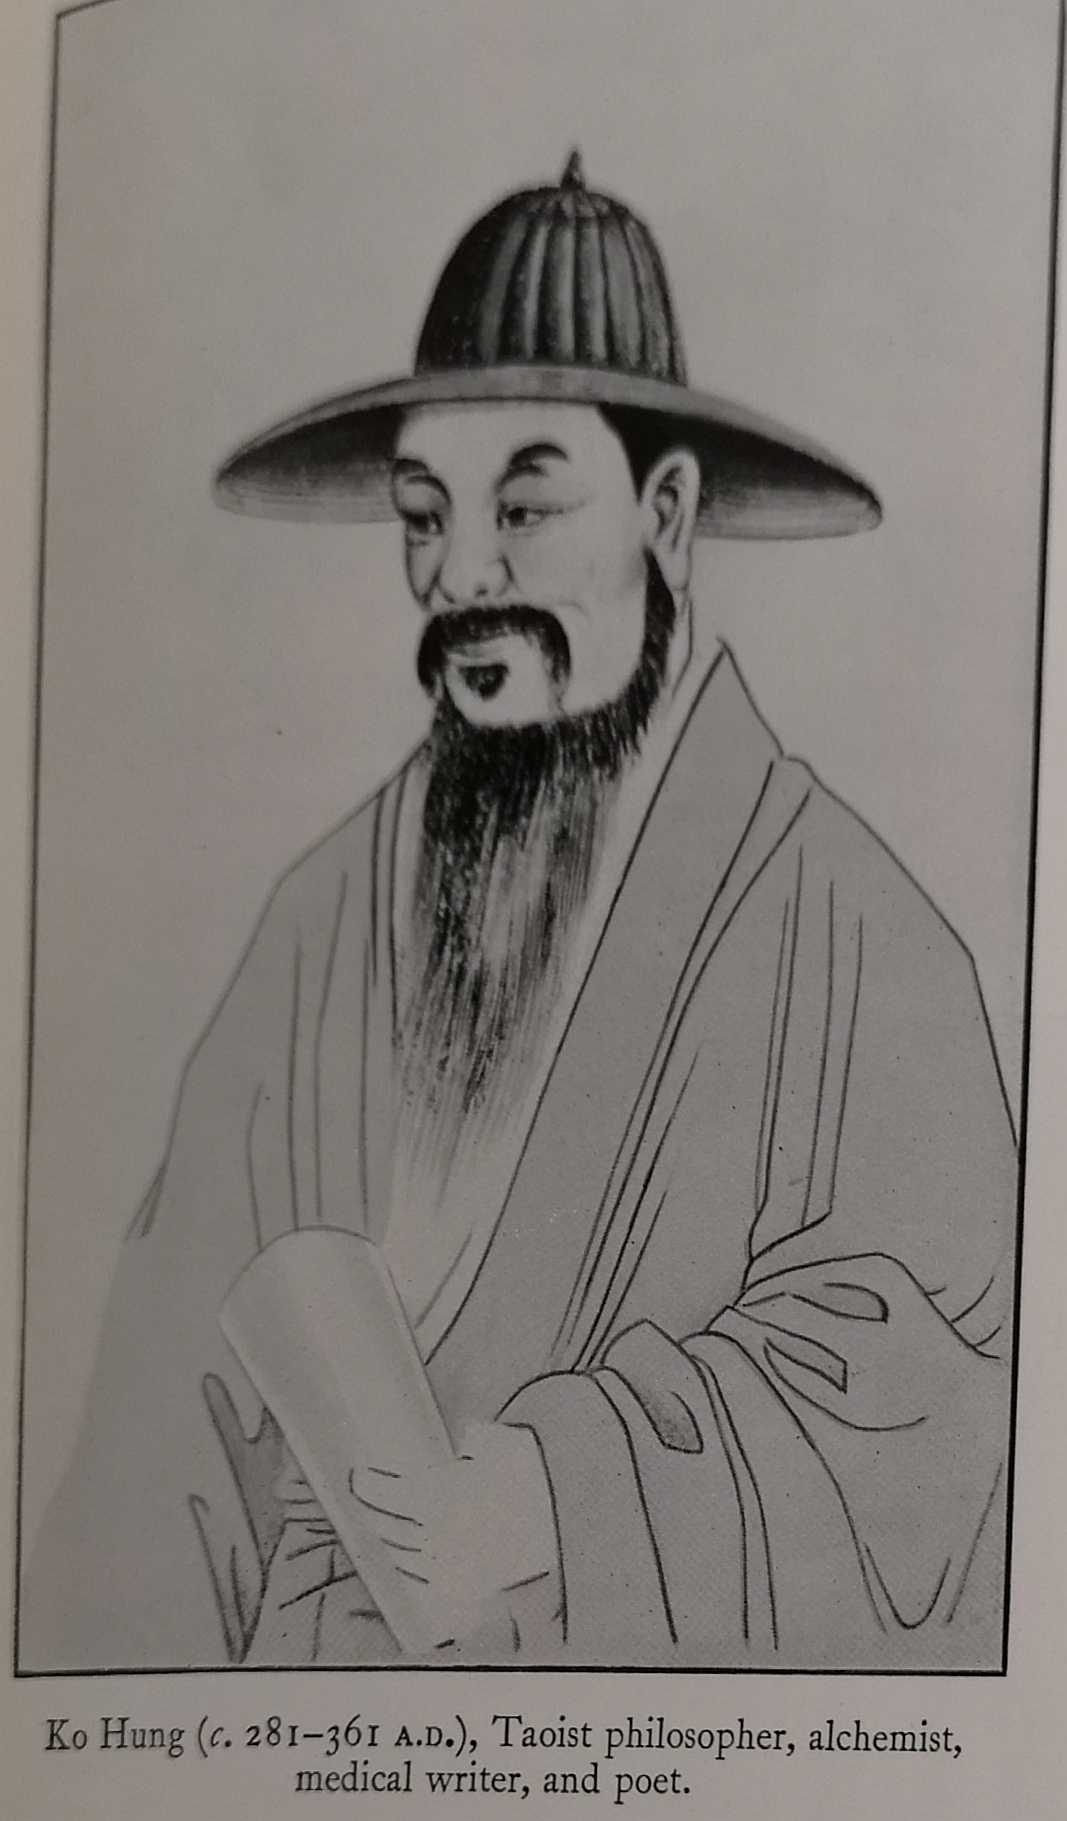 A taoist philosopher, alchemist, medical writer and poet, Ko Hung was the originator of first aid in traditional Chinese medicine.